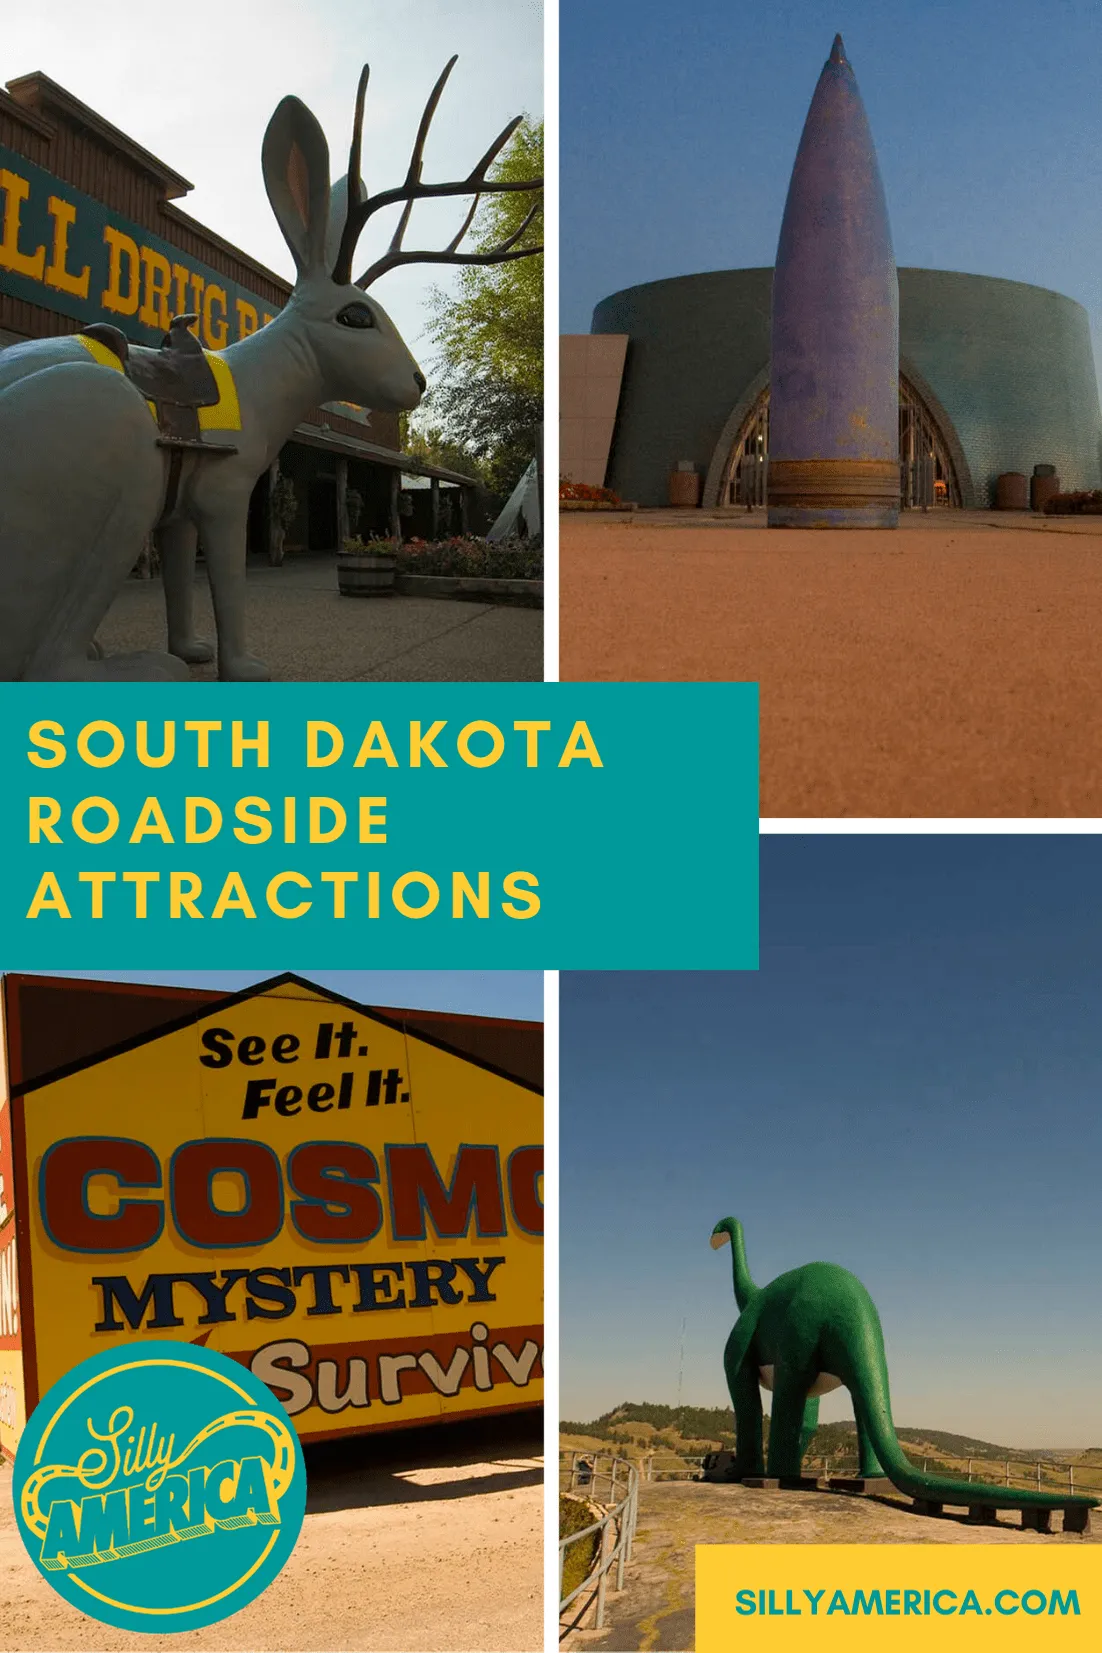 The best South Dakota roadside attractions to visit on a South Dakota road trip. Add these weird roadside oddities to your travel bucket list or itinerary! #SouthDakotaRoadsideAttractions #SouthDakotaRoadsideAttraction #RoadsideAttractions #RoadsideAttraction #RoadTrip #SouthDakotaRoadTrip #ThingsToDoInSouthDakota #SouthDakotaFamilyVacations #SouthDakotaRoadTripItinerary #SouthDakotaRoadTripNBucketLists #SouthDakotaBucketList #SouthDakotaRoadTripIdeas